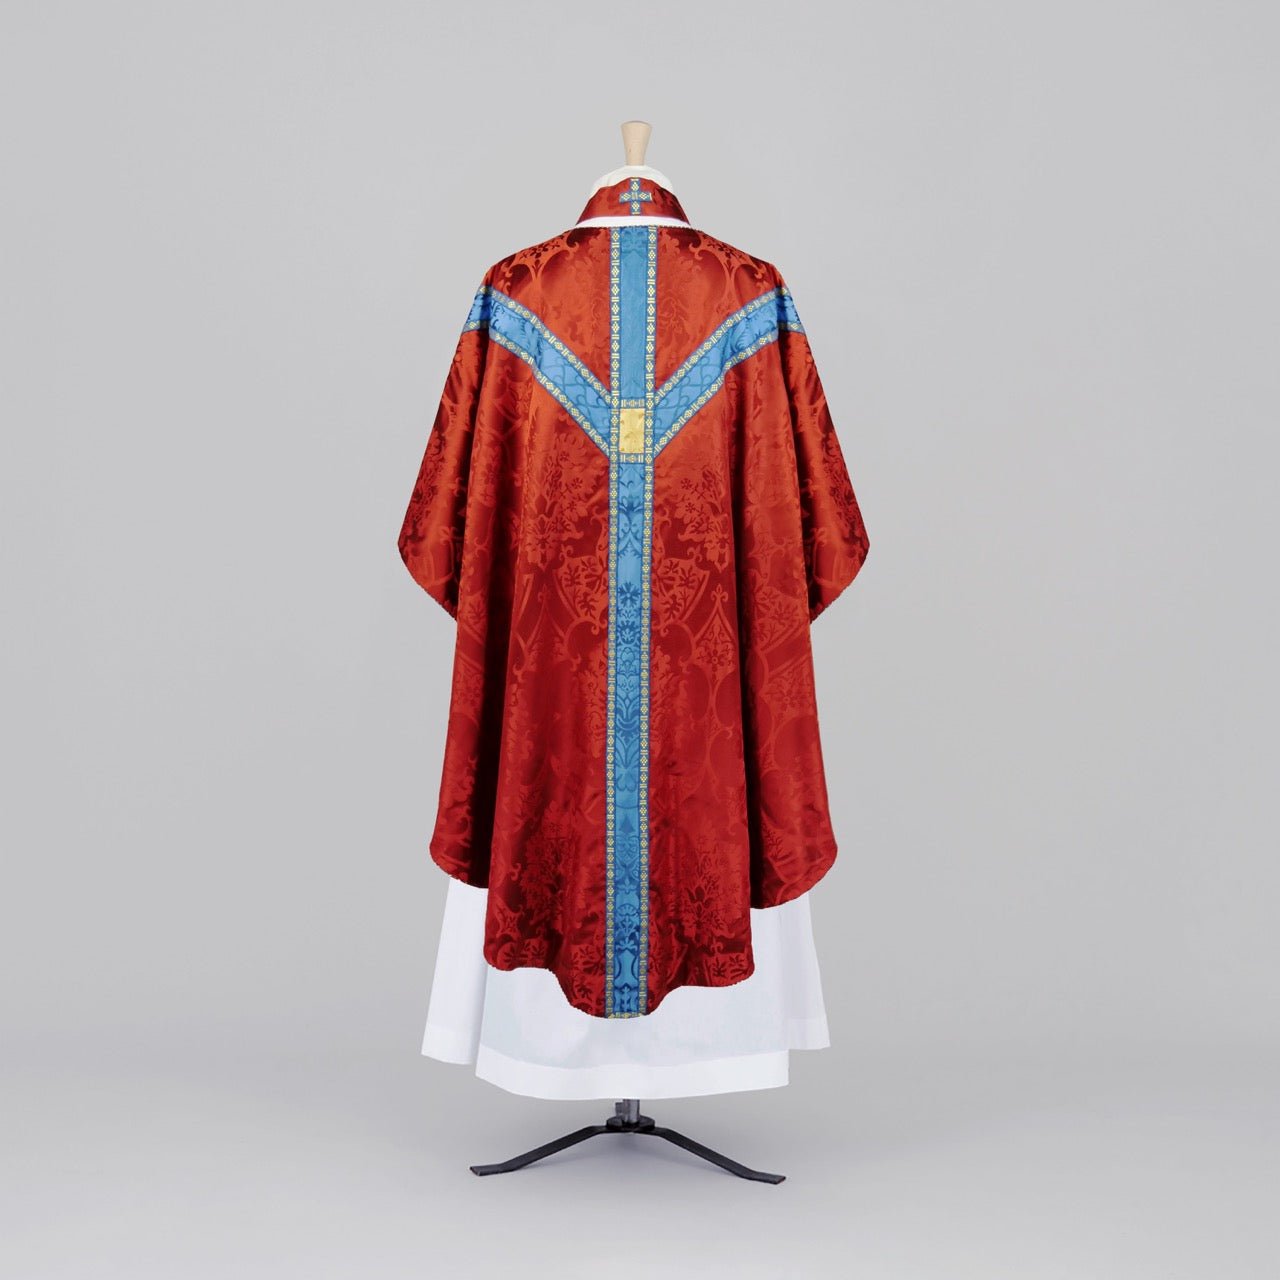 Full Gothic Chasuble in Sarum Red 'Gothic' with Blue 'Comper Cathedral' Orphreys - Watts & Co.